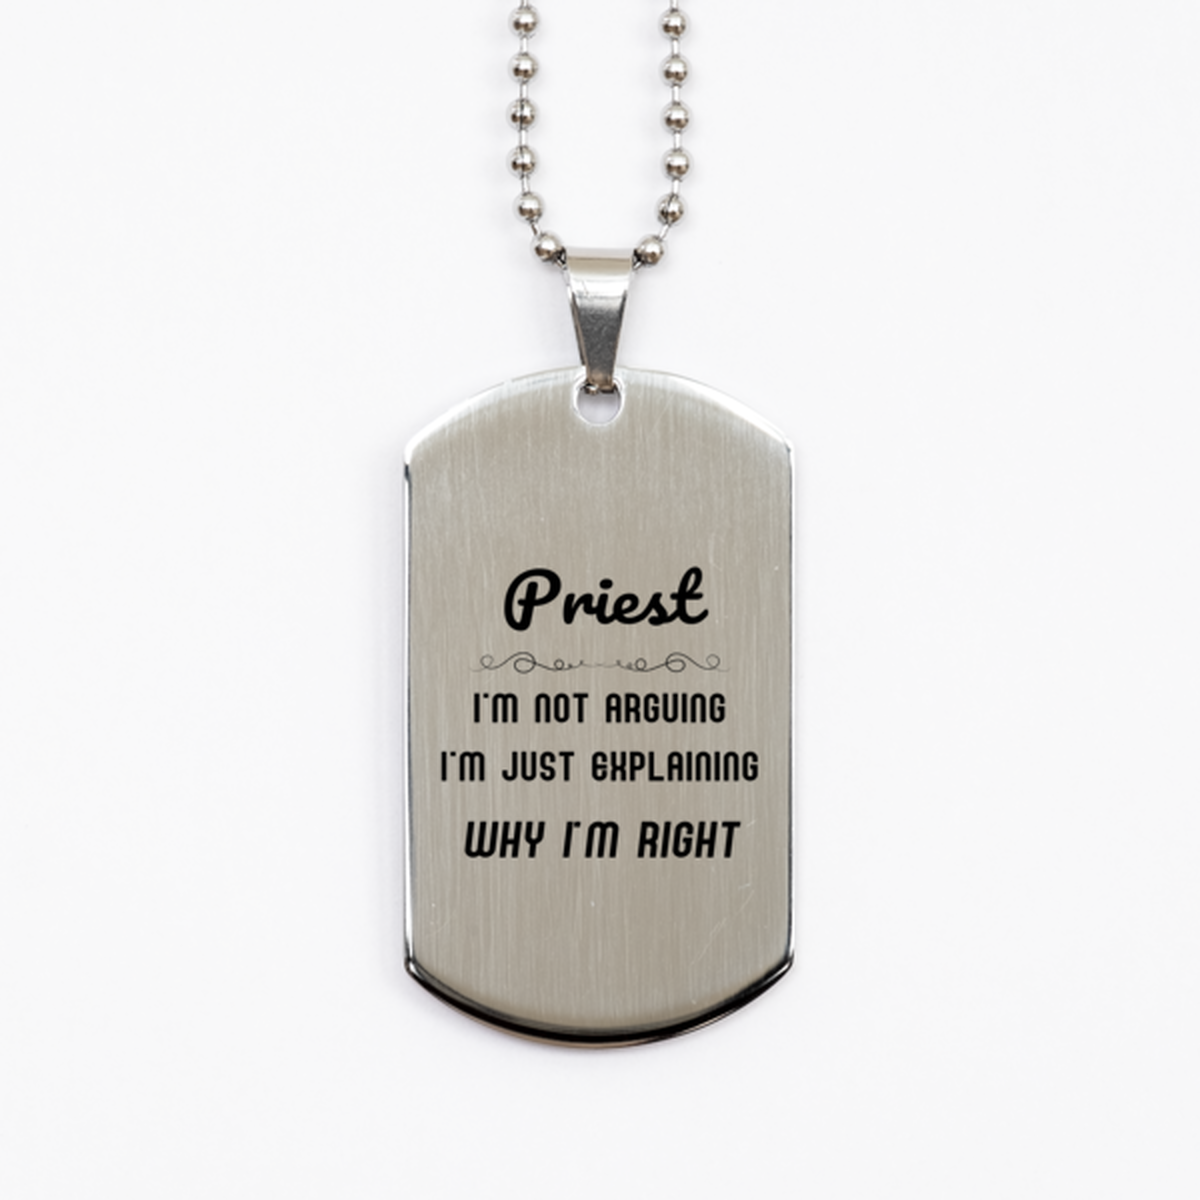 Priest I'm not Arguing. I'm Just Explaining Why I'm RIGHT Silver Dog Tag, Funny Saying Quote Priest Gifts For Priest Graduation Birthday Christmas Gifts for Men Women Coworker